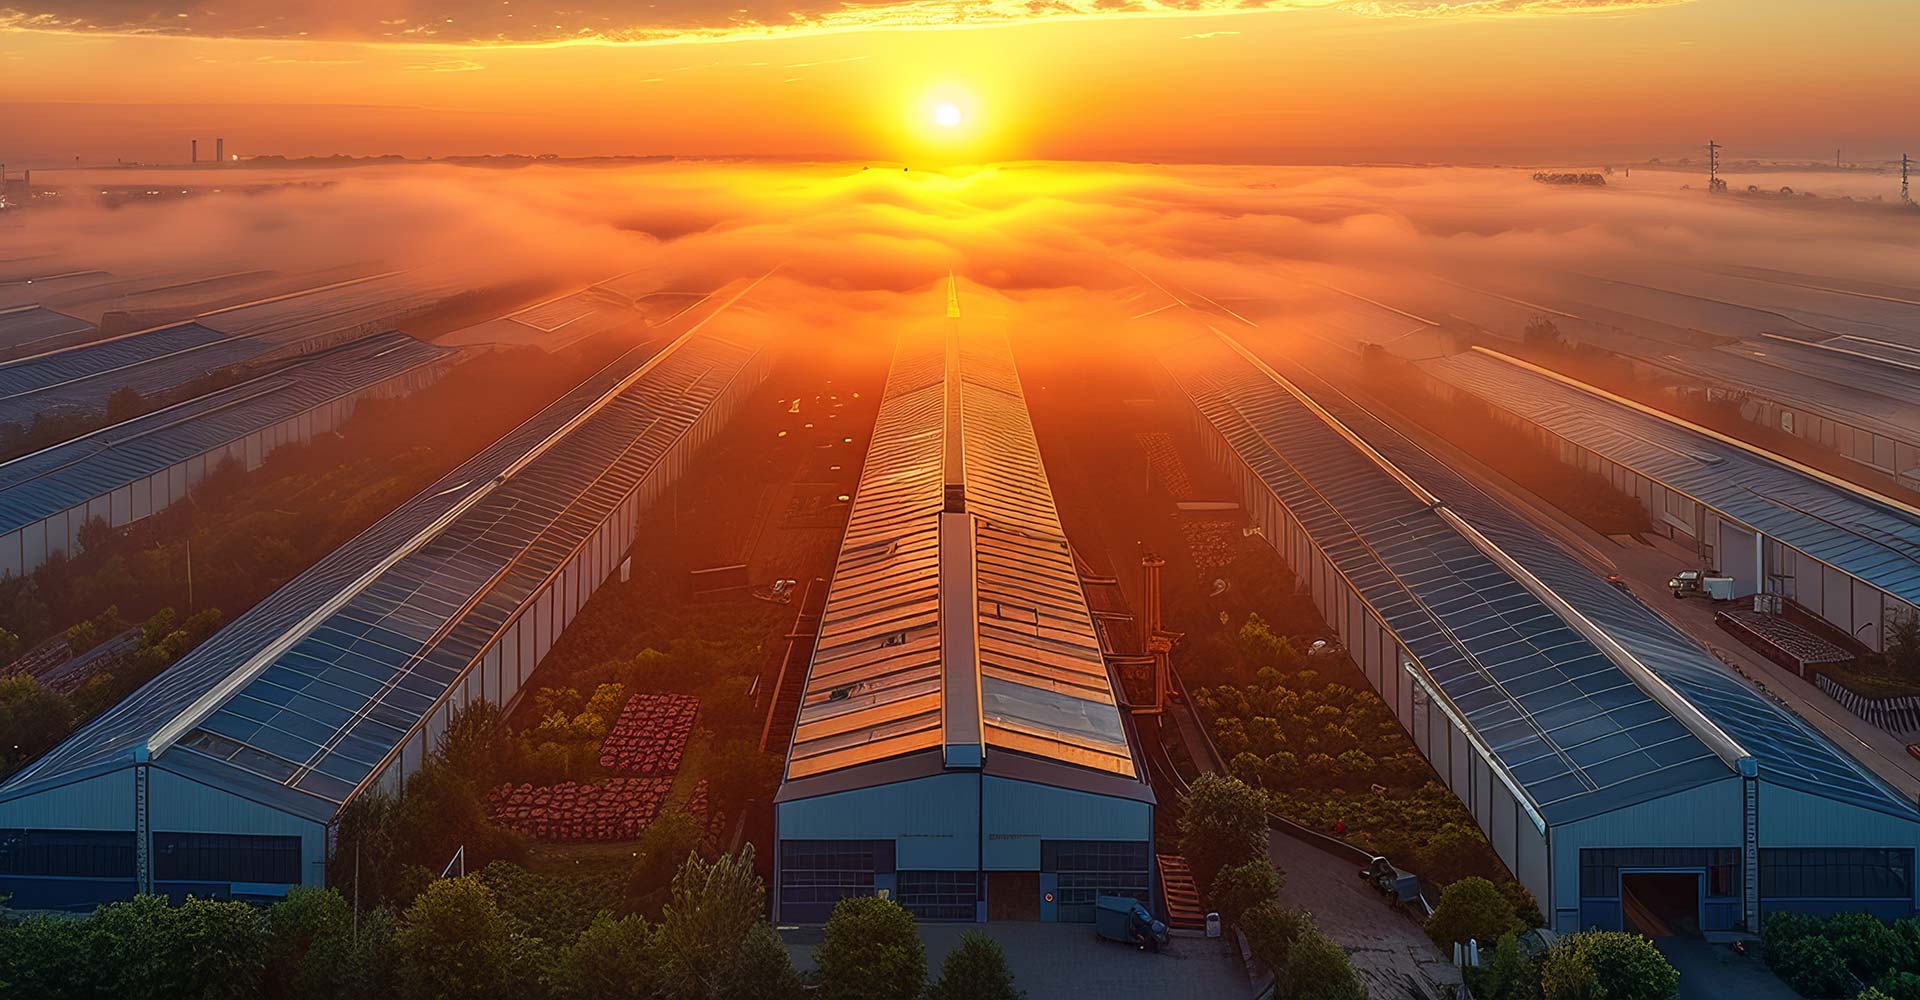 A sunrise over a large industrial greenhouse complex, with sunlight filtering through a low-lying mist, illuminating the roofs and surrounding vegetation.